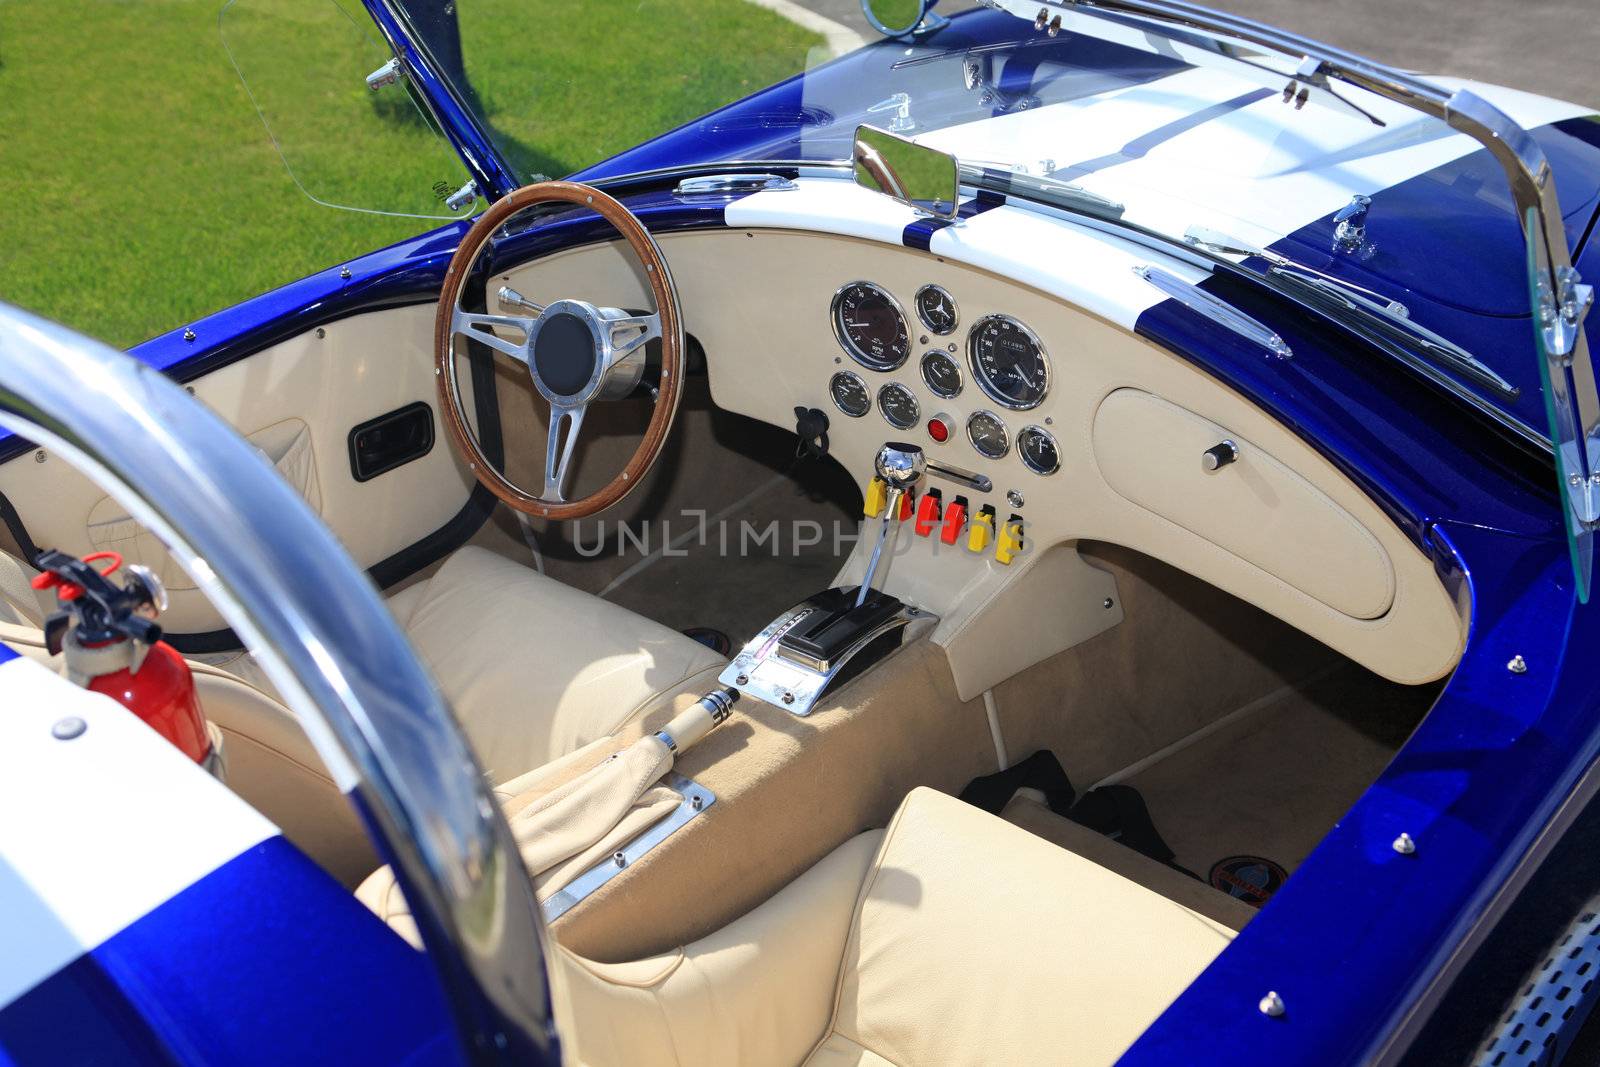 An interior of the blue retro old car